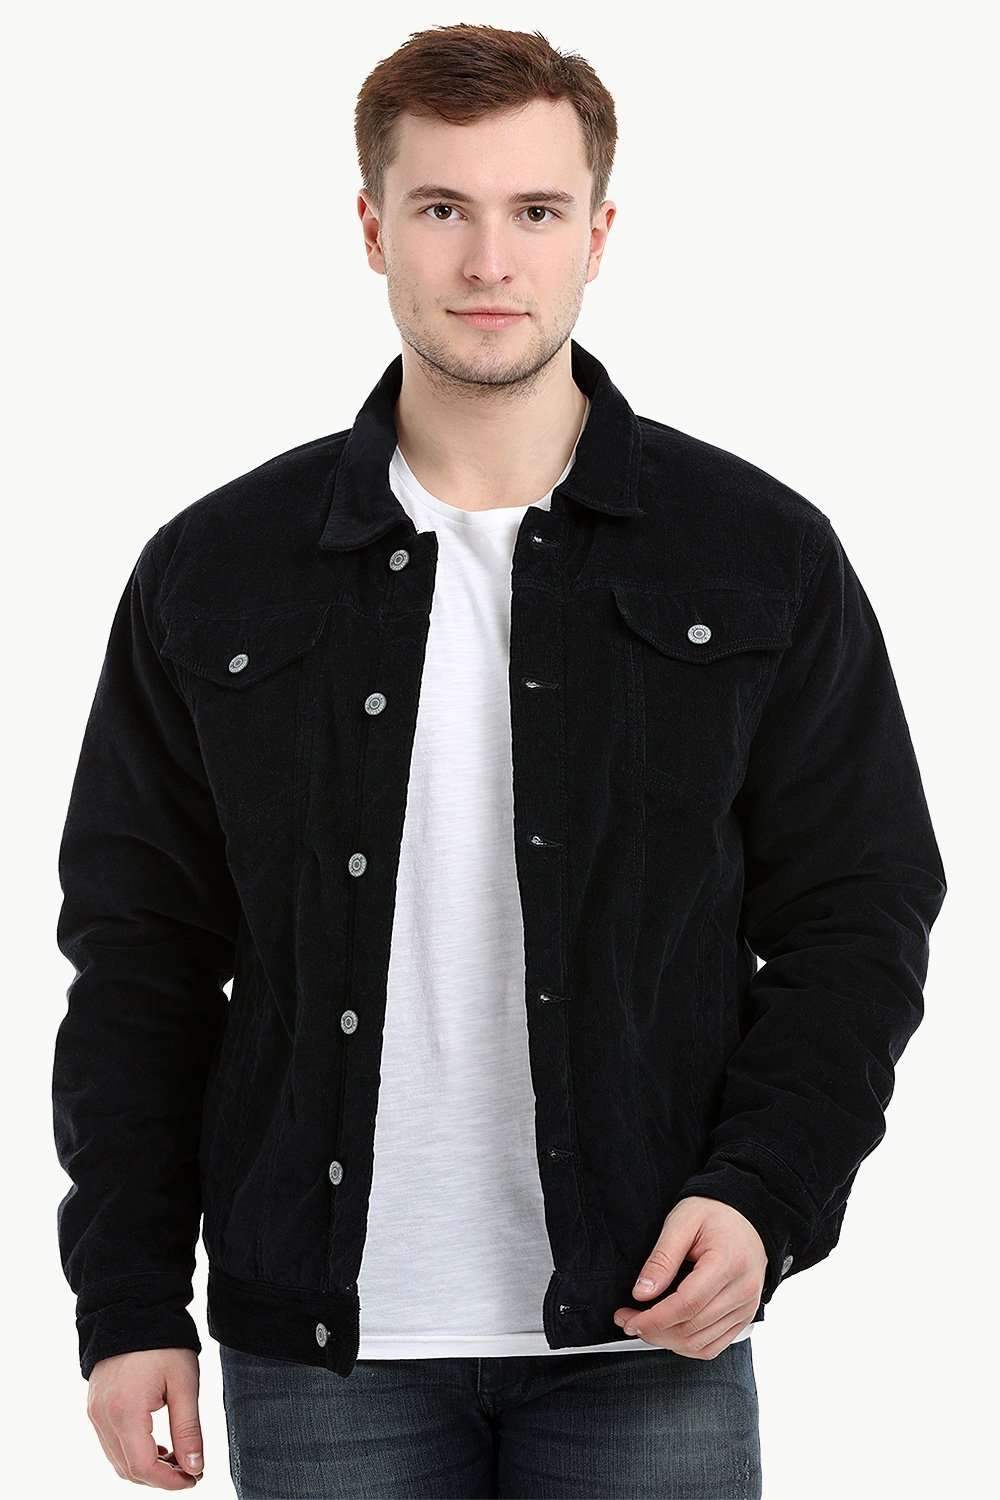 Men's Navy Corduroy Sherpa Lined Jacket – brinell